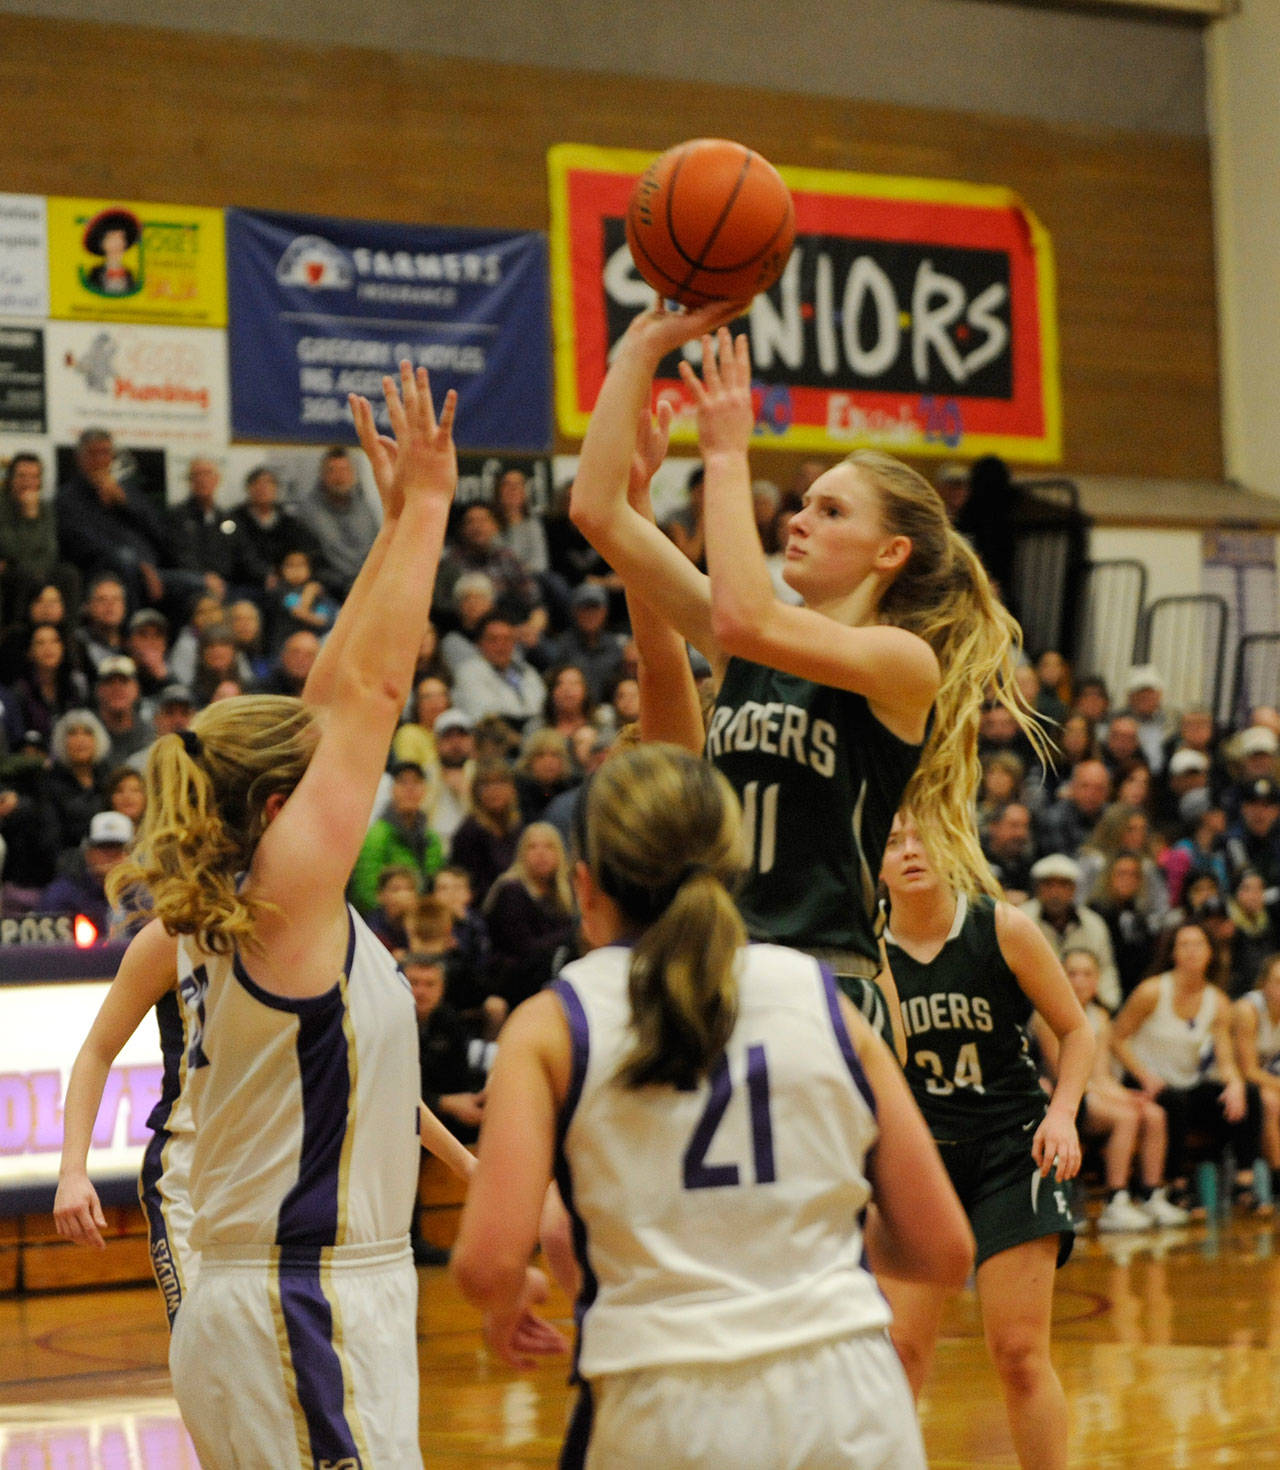 Port Angeles’ Millie Long, right, puts up a shot over the Sequim defense in the Roughriders’ 64-42 win at Sequim on Jan. 18. Long had 12 points. Sequim Gazette photo by Michael Dashiell